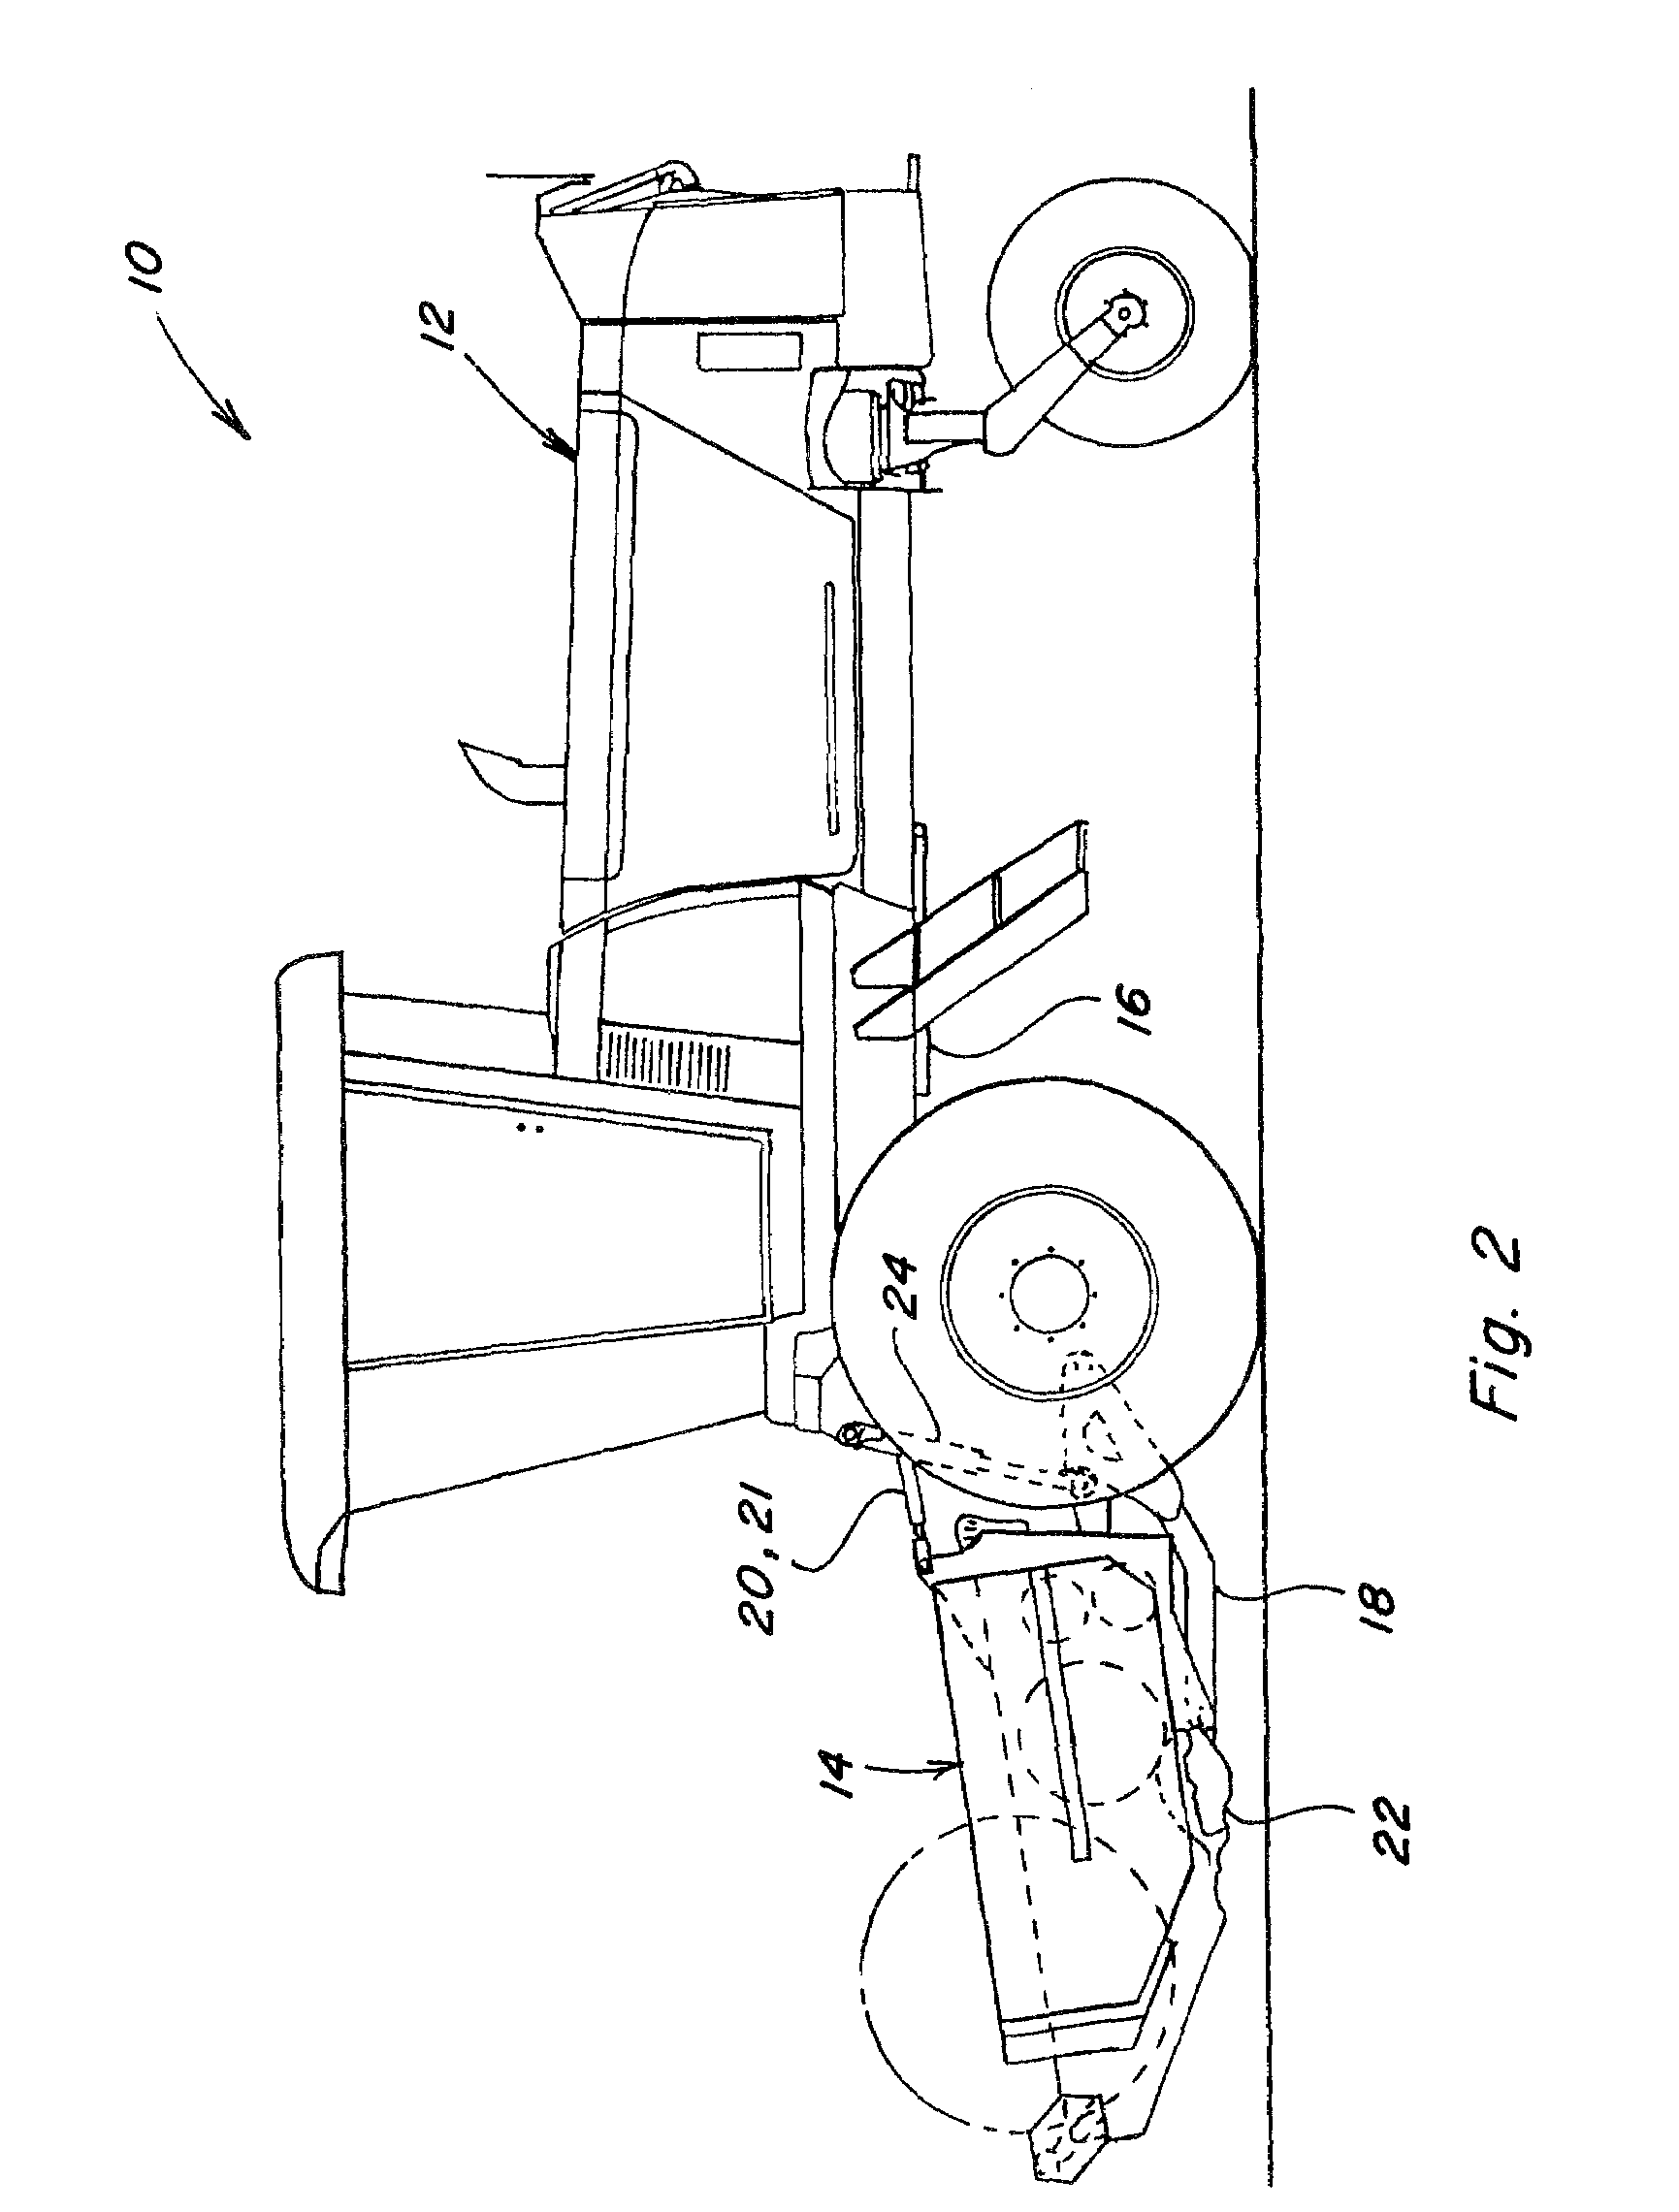 Header flotation and lift system with dual mode operation for a plant cutting machine